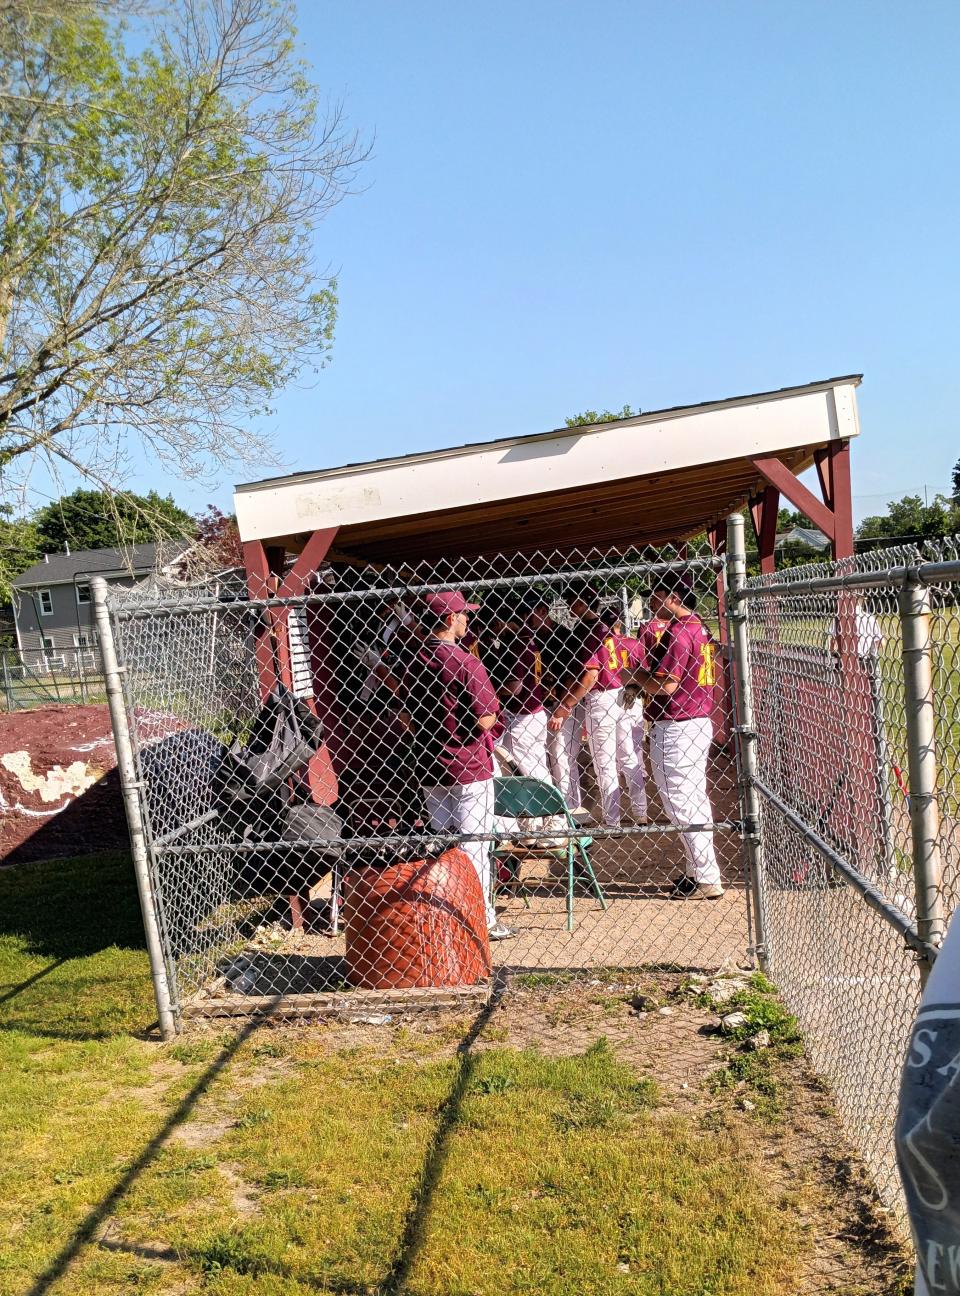 The Case baseball players pack up their stuff after Thursday's Division IV preliminary home game against Lynn Voc-Tech was postponed. The game will take place on Saturday at Durfee High School, beginning at noon.